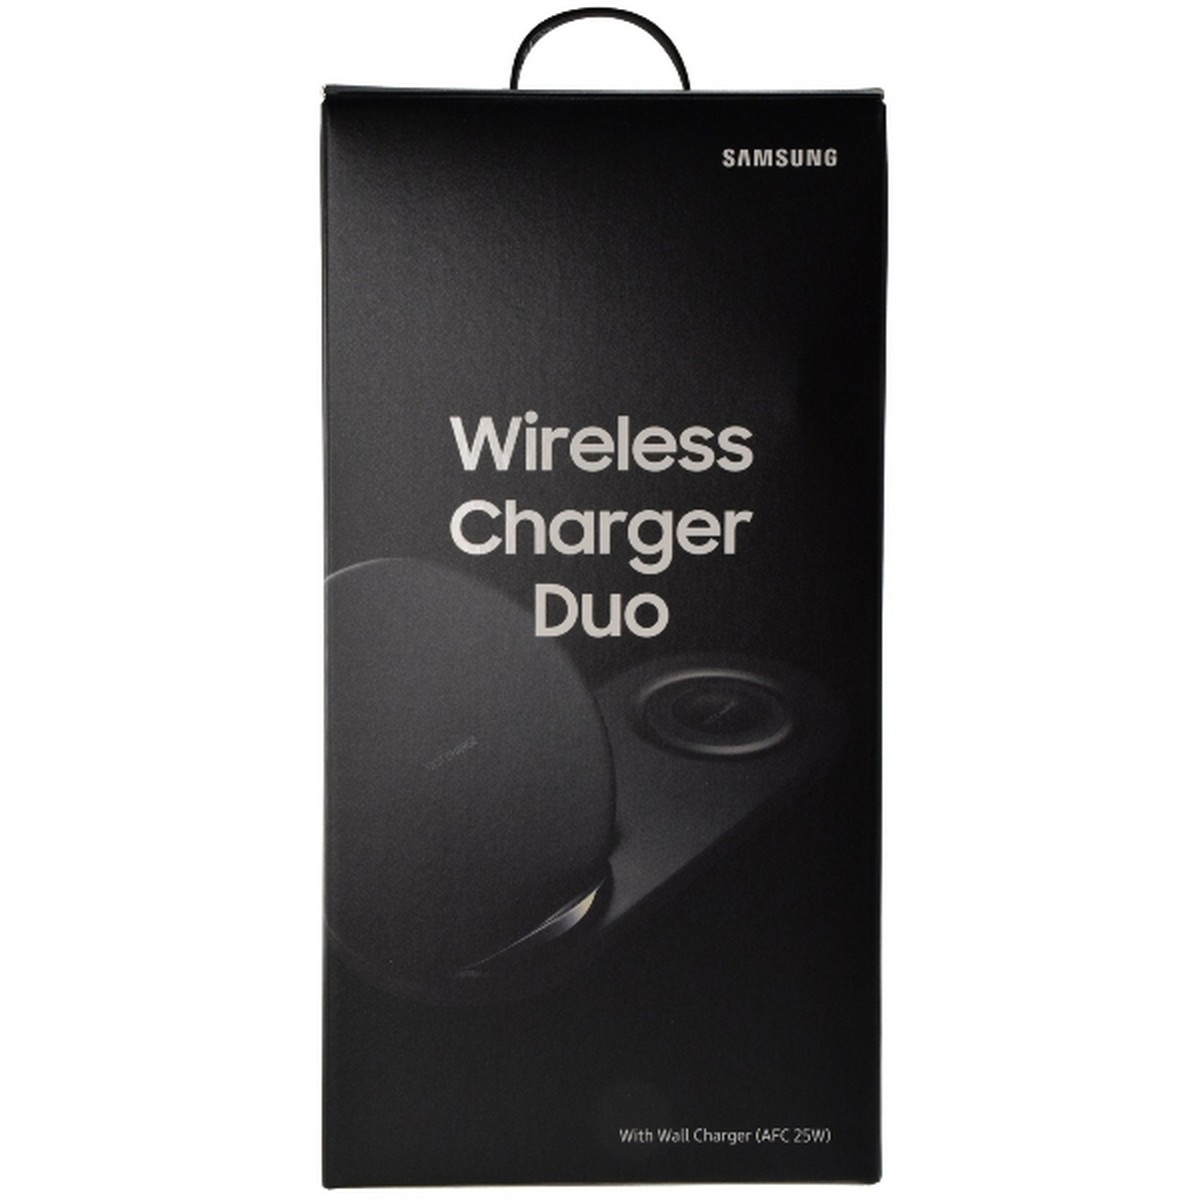 Samsung Wireless Charger Pad Duo With 25w Super Fast Adapter: Buy Online at  Best Prices in Pakistan 